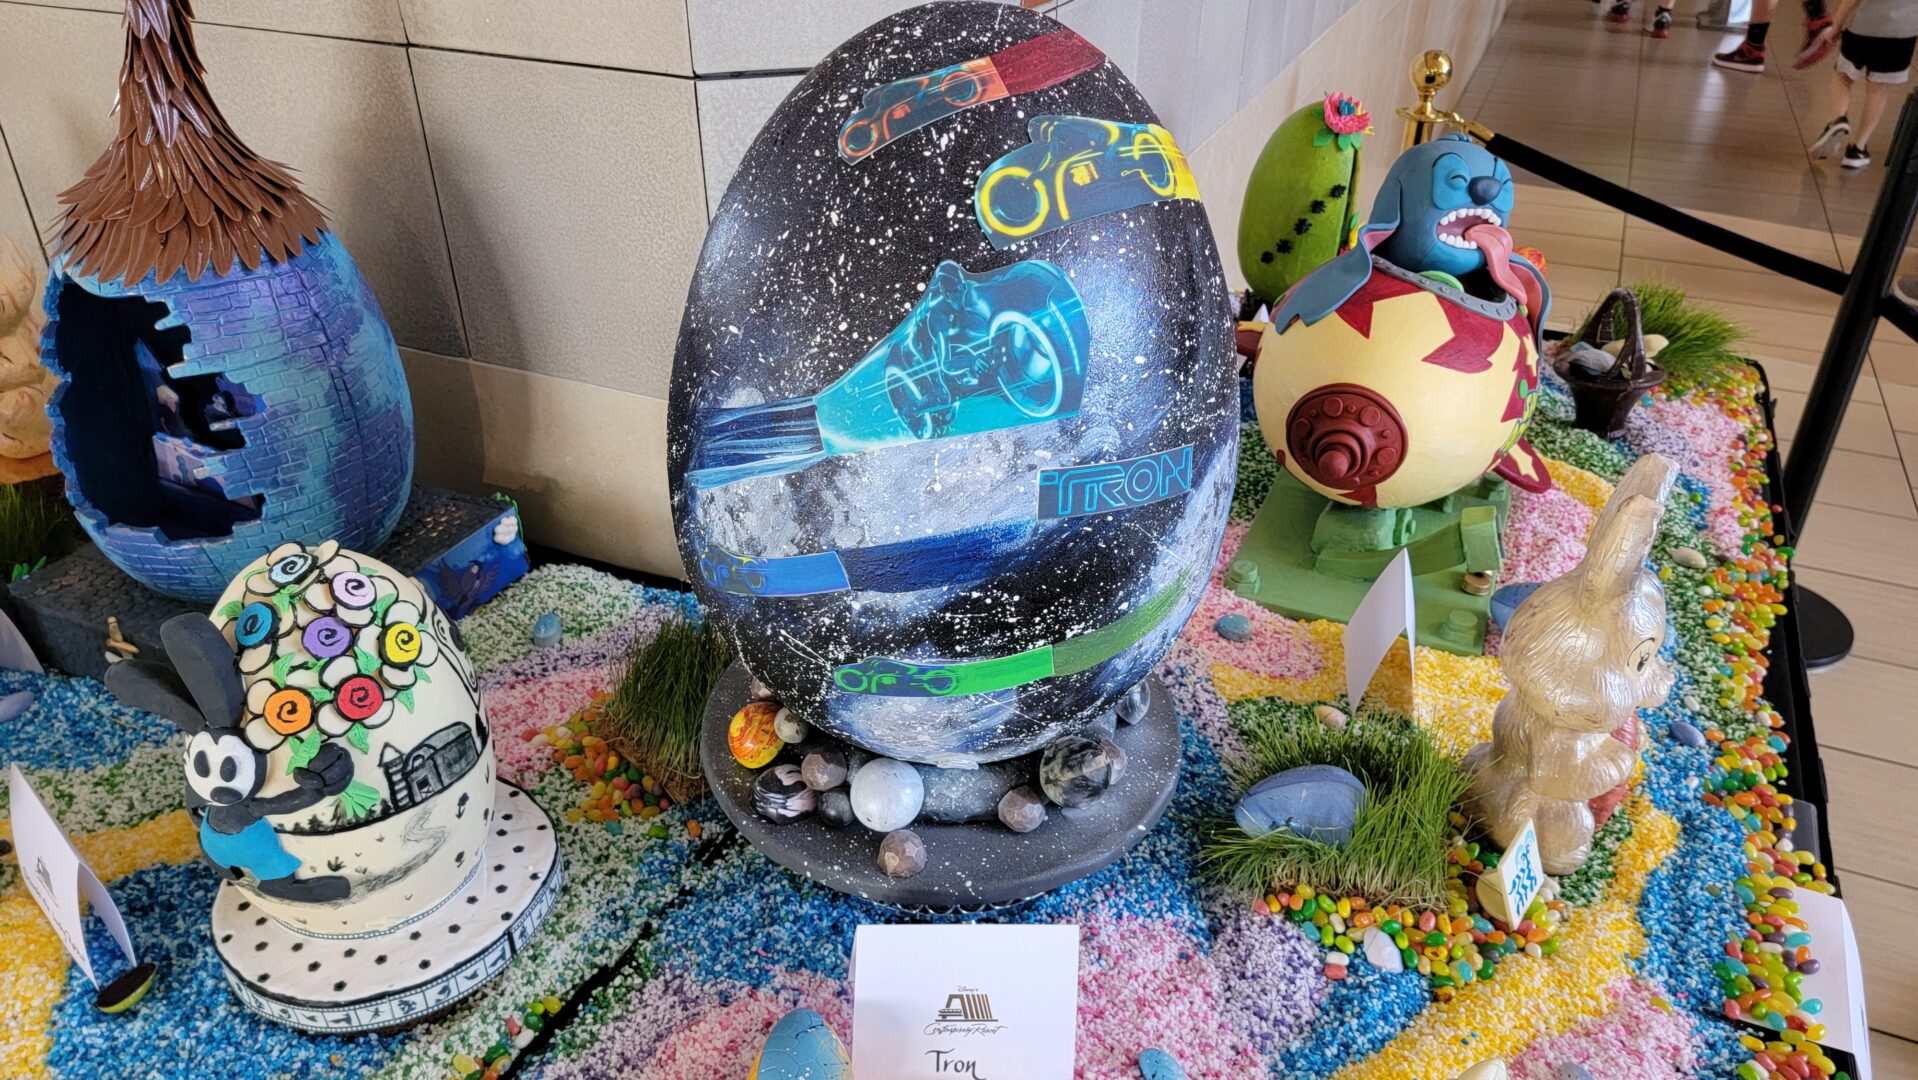 Get Hopping to Disney’s Contemporary Resort to see the Festive Easter Egg Display